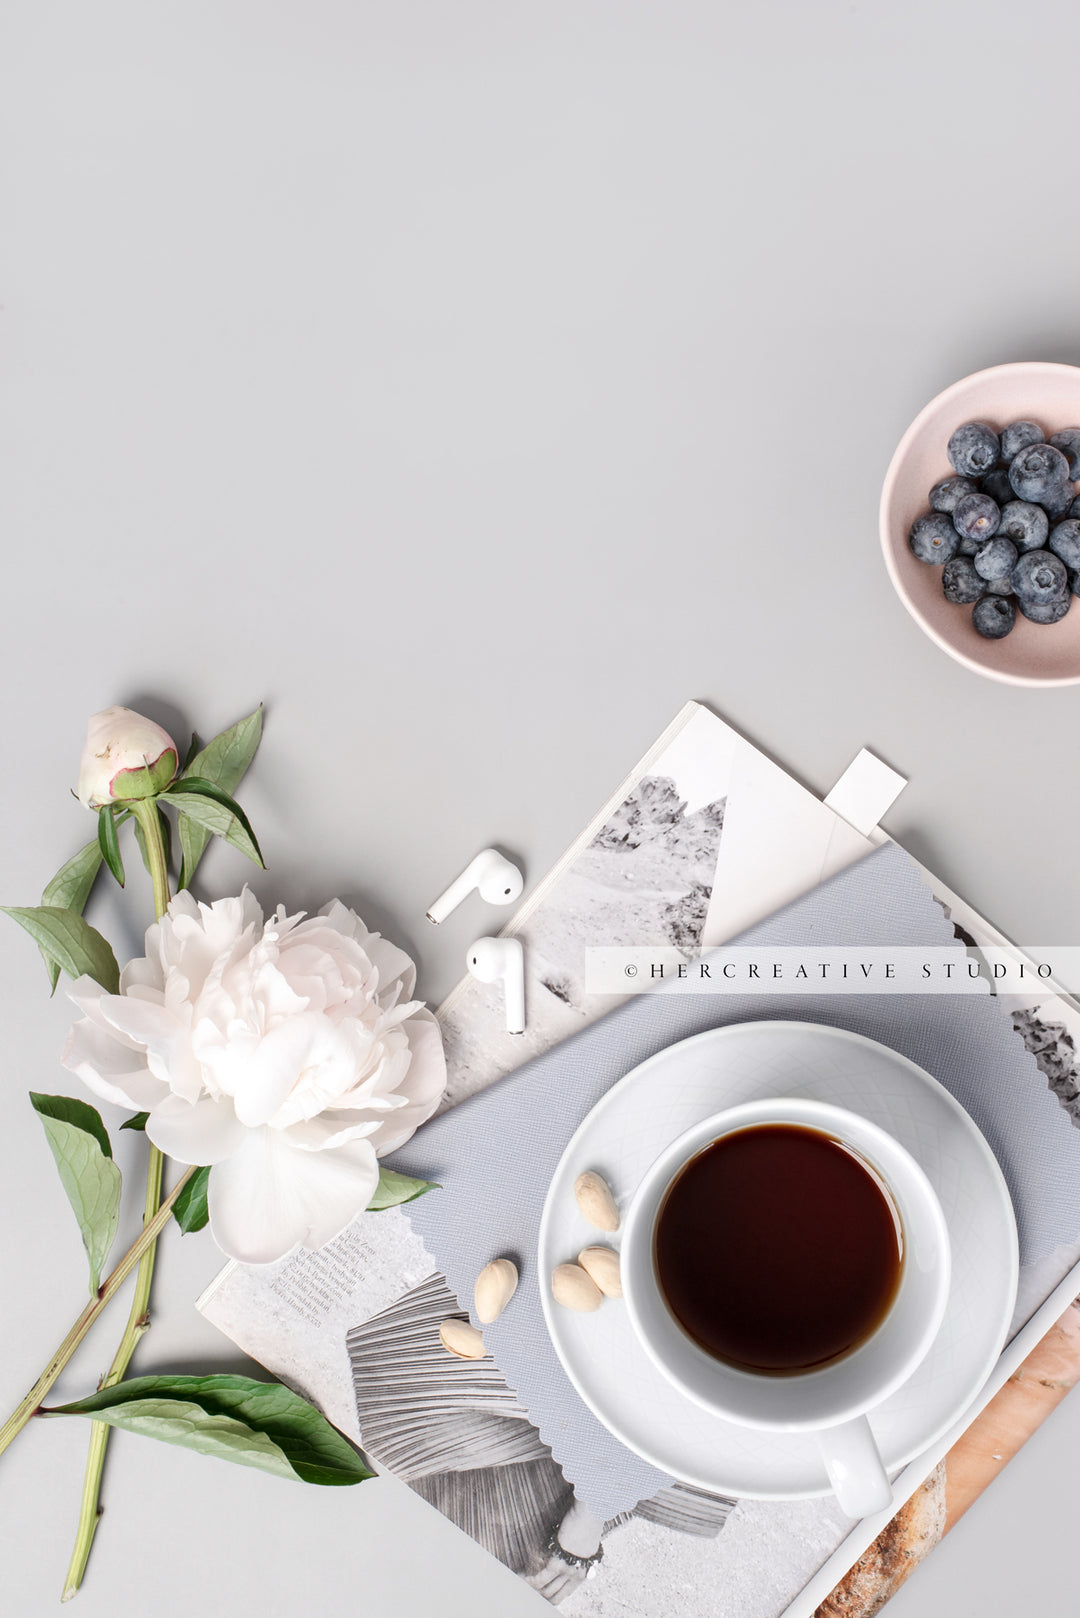 Berries, Peony and Earbuds on Grey Workspace. Stock Image